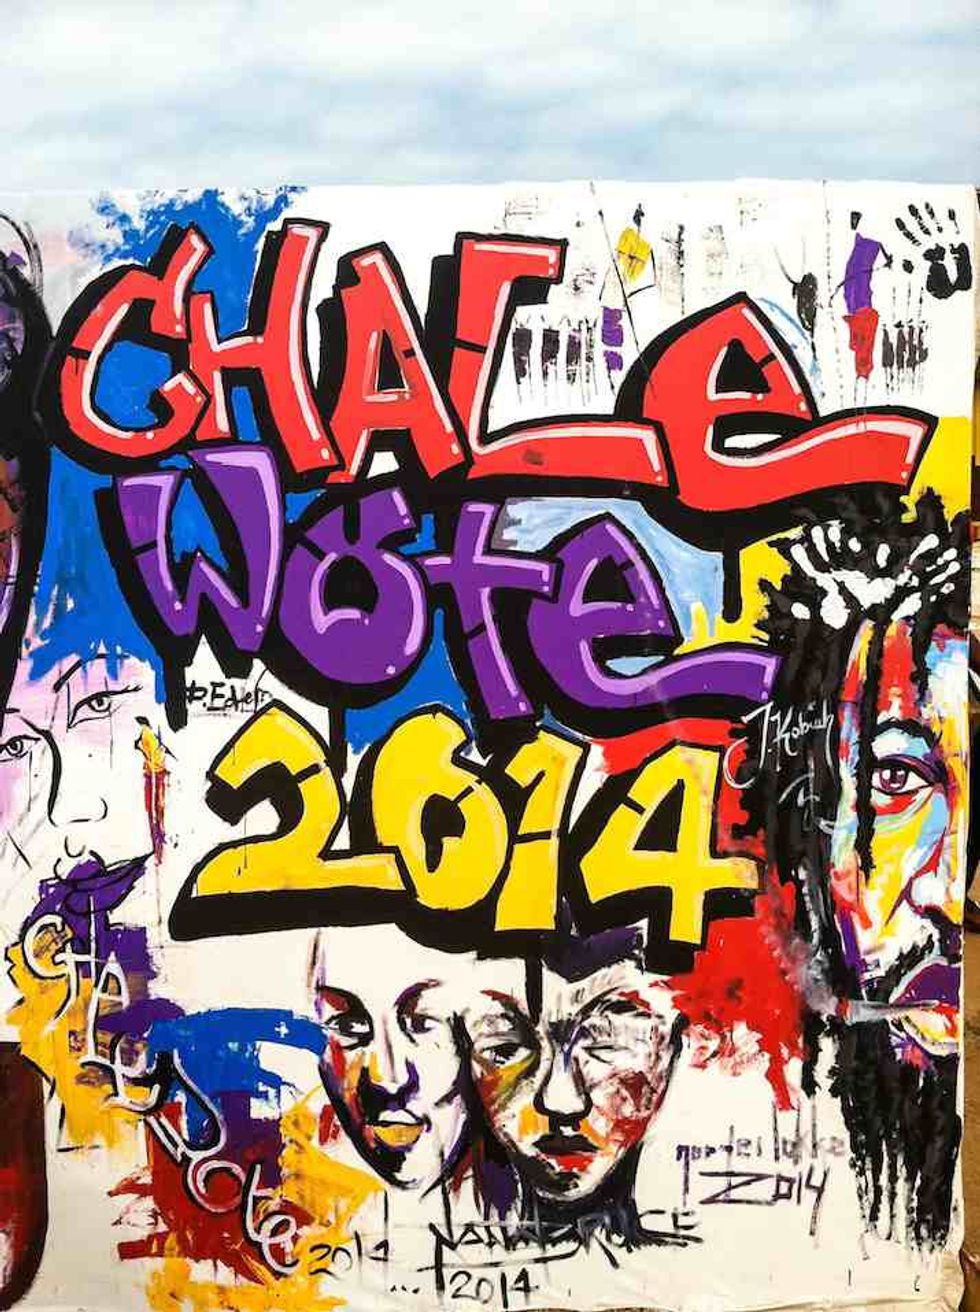 Accra's Chale Wote Street Art Festival Takes Over Jamestown [Gallery]